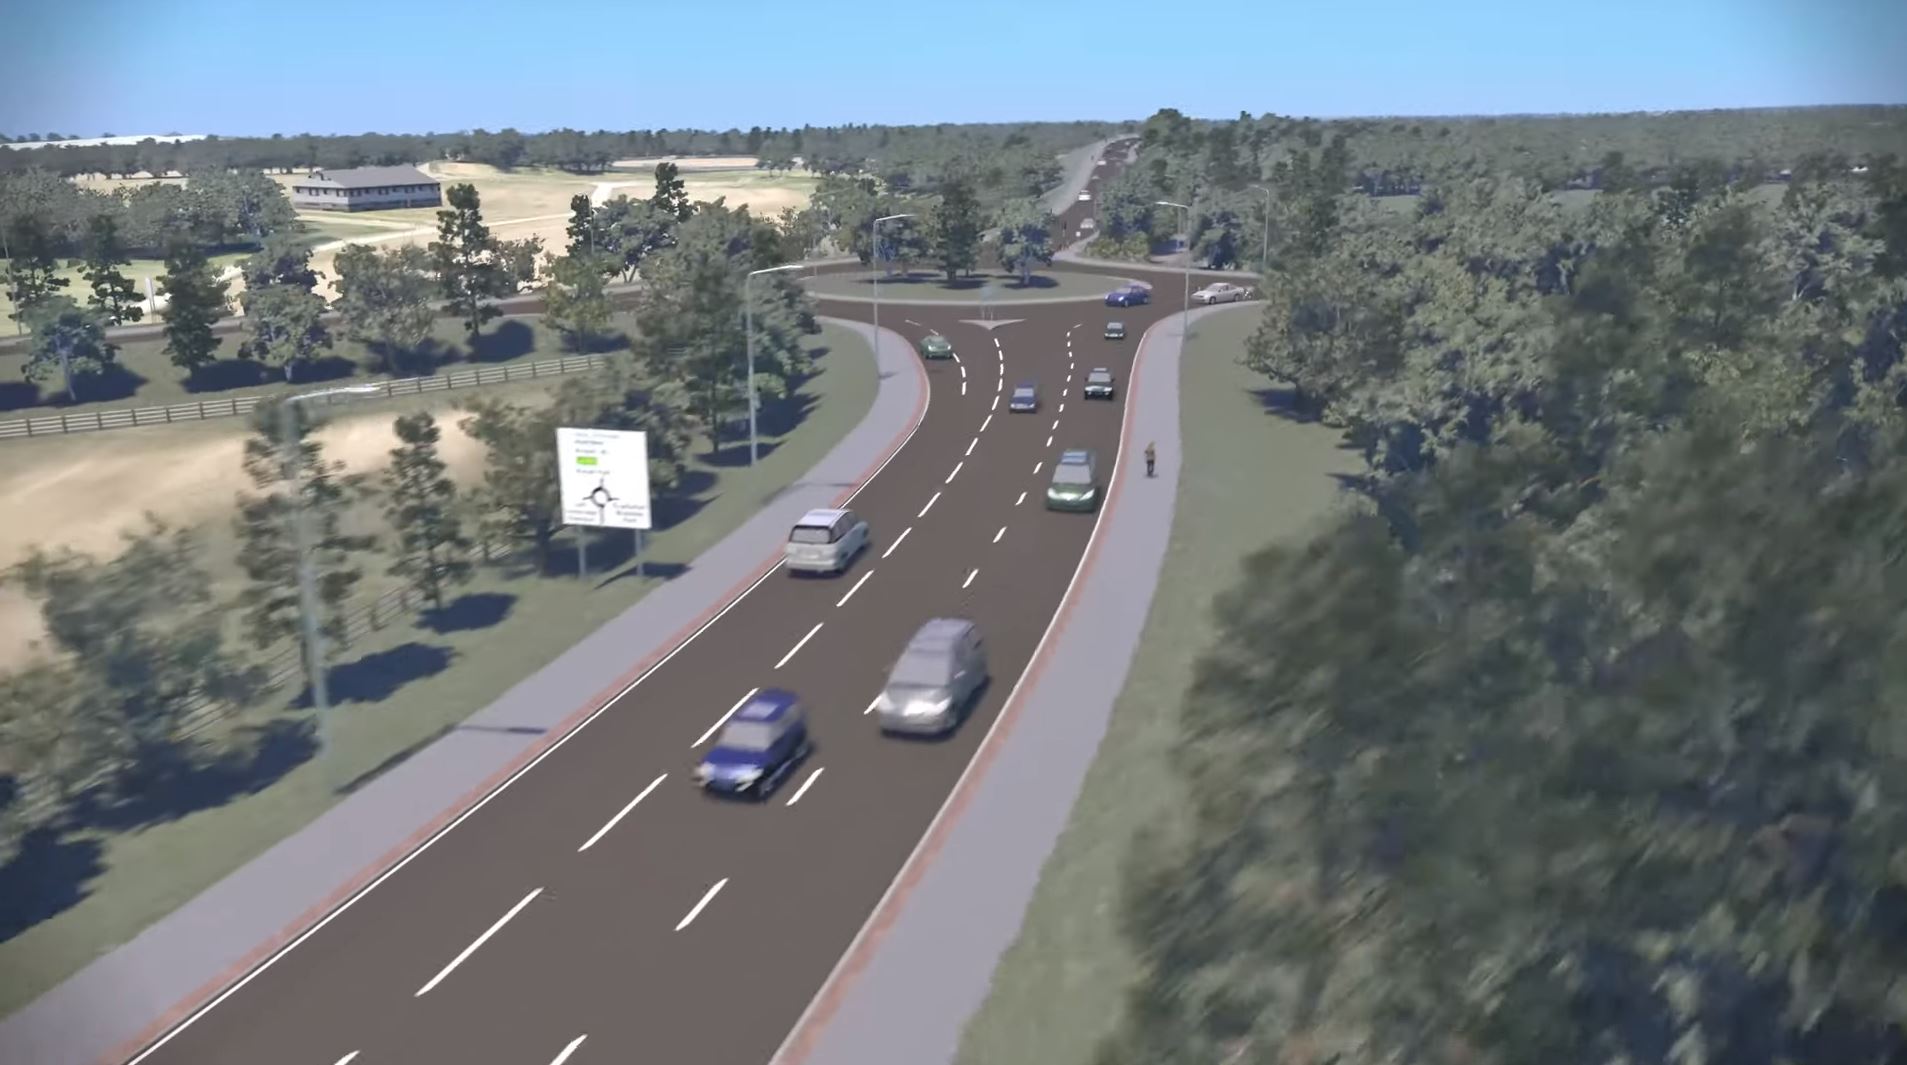 The video shows what the A9/A96 link road will look like.